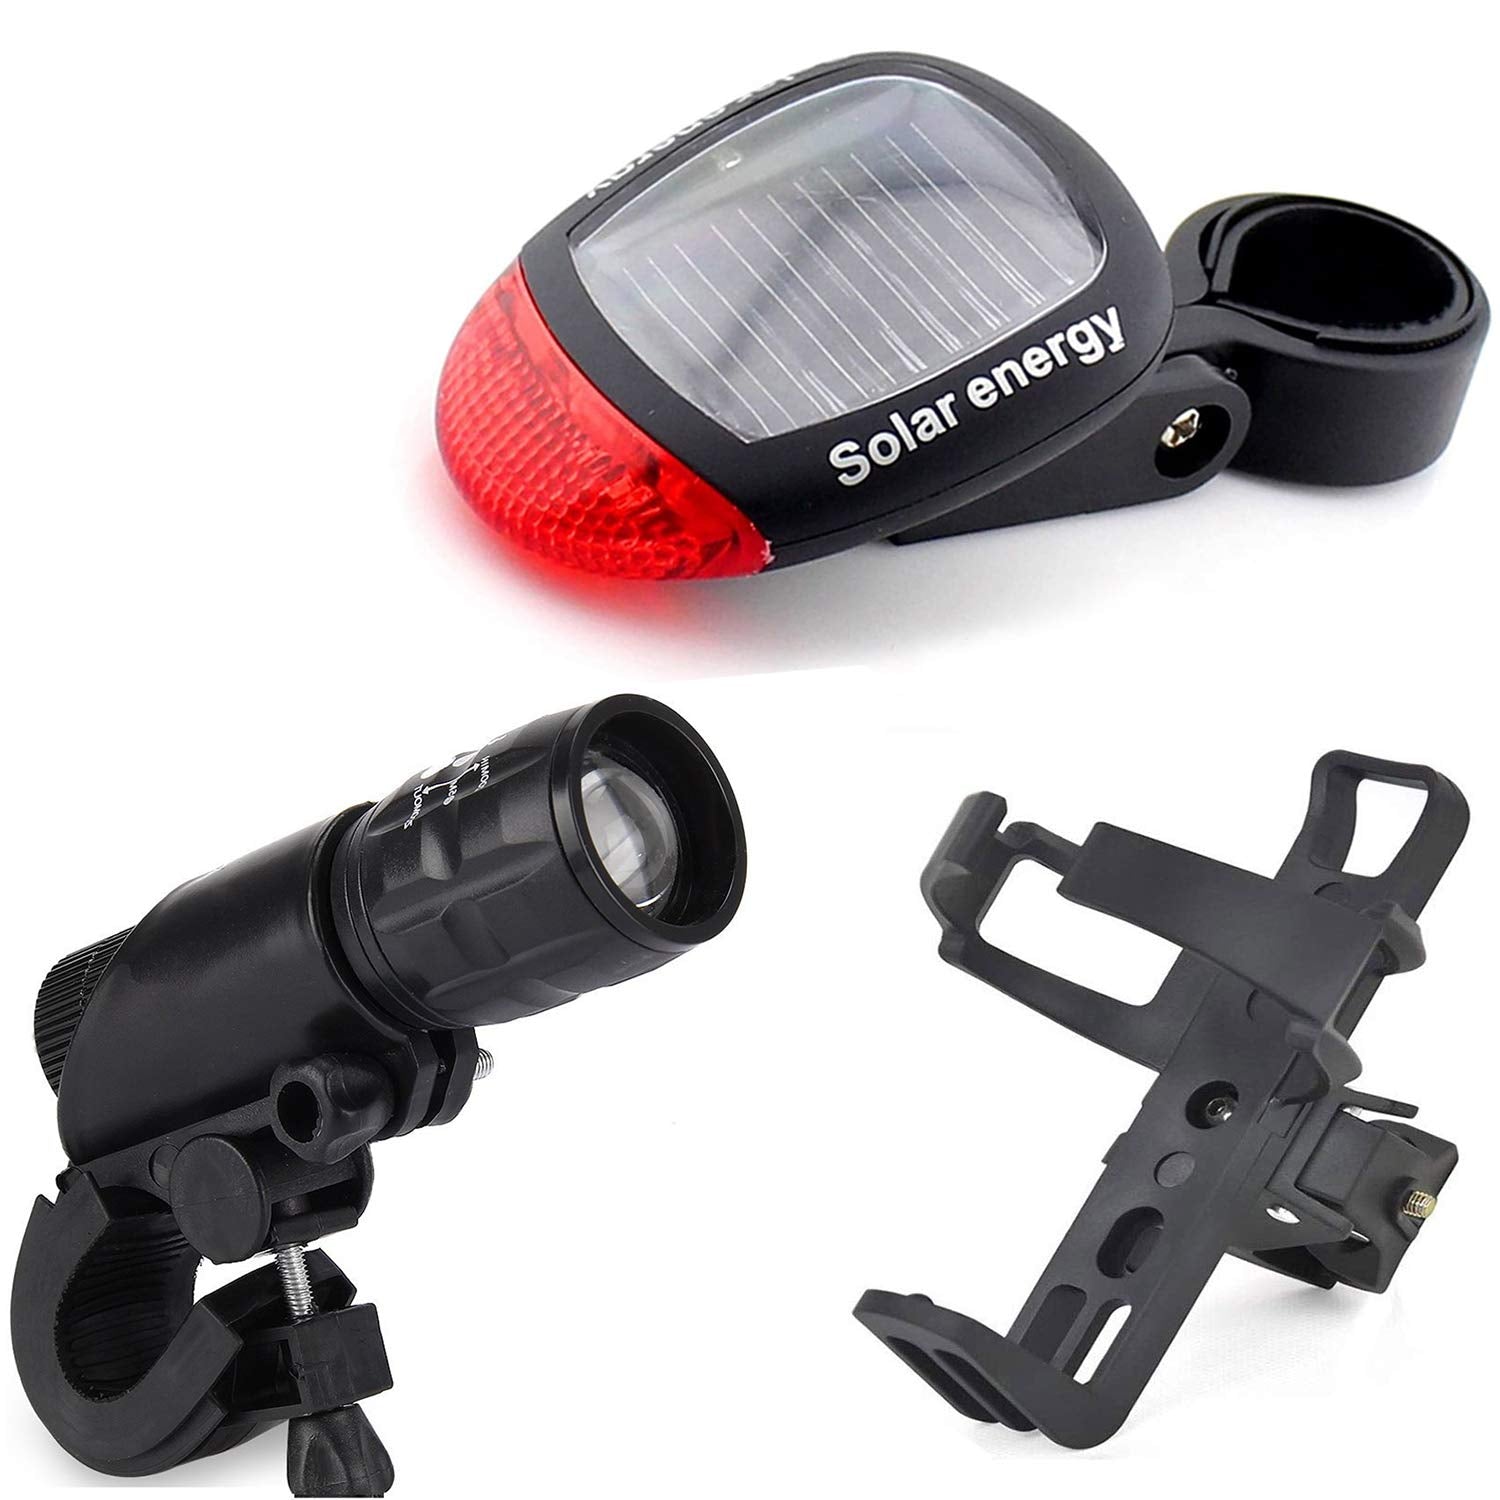 STRAUSS Bicycle Zoom LED Torch with Mount Holder with Solar Tail Light and Bottle Holder